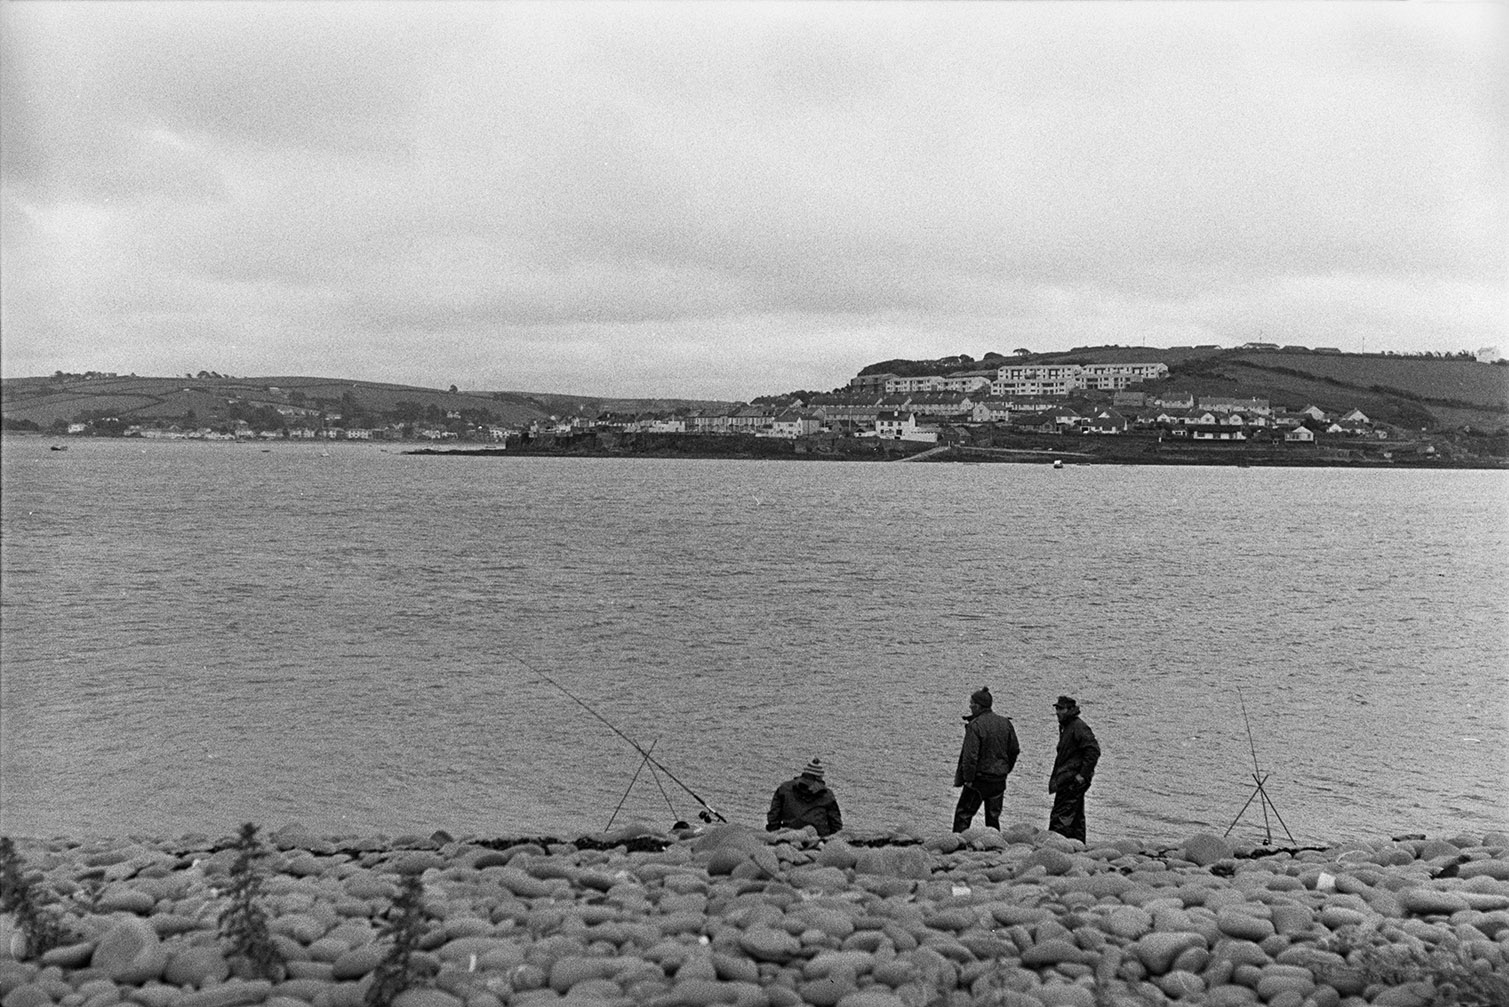 Three people fishing on a pebble beach with a town in the distance.